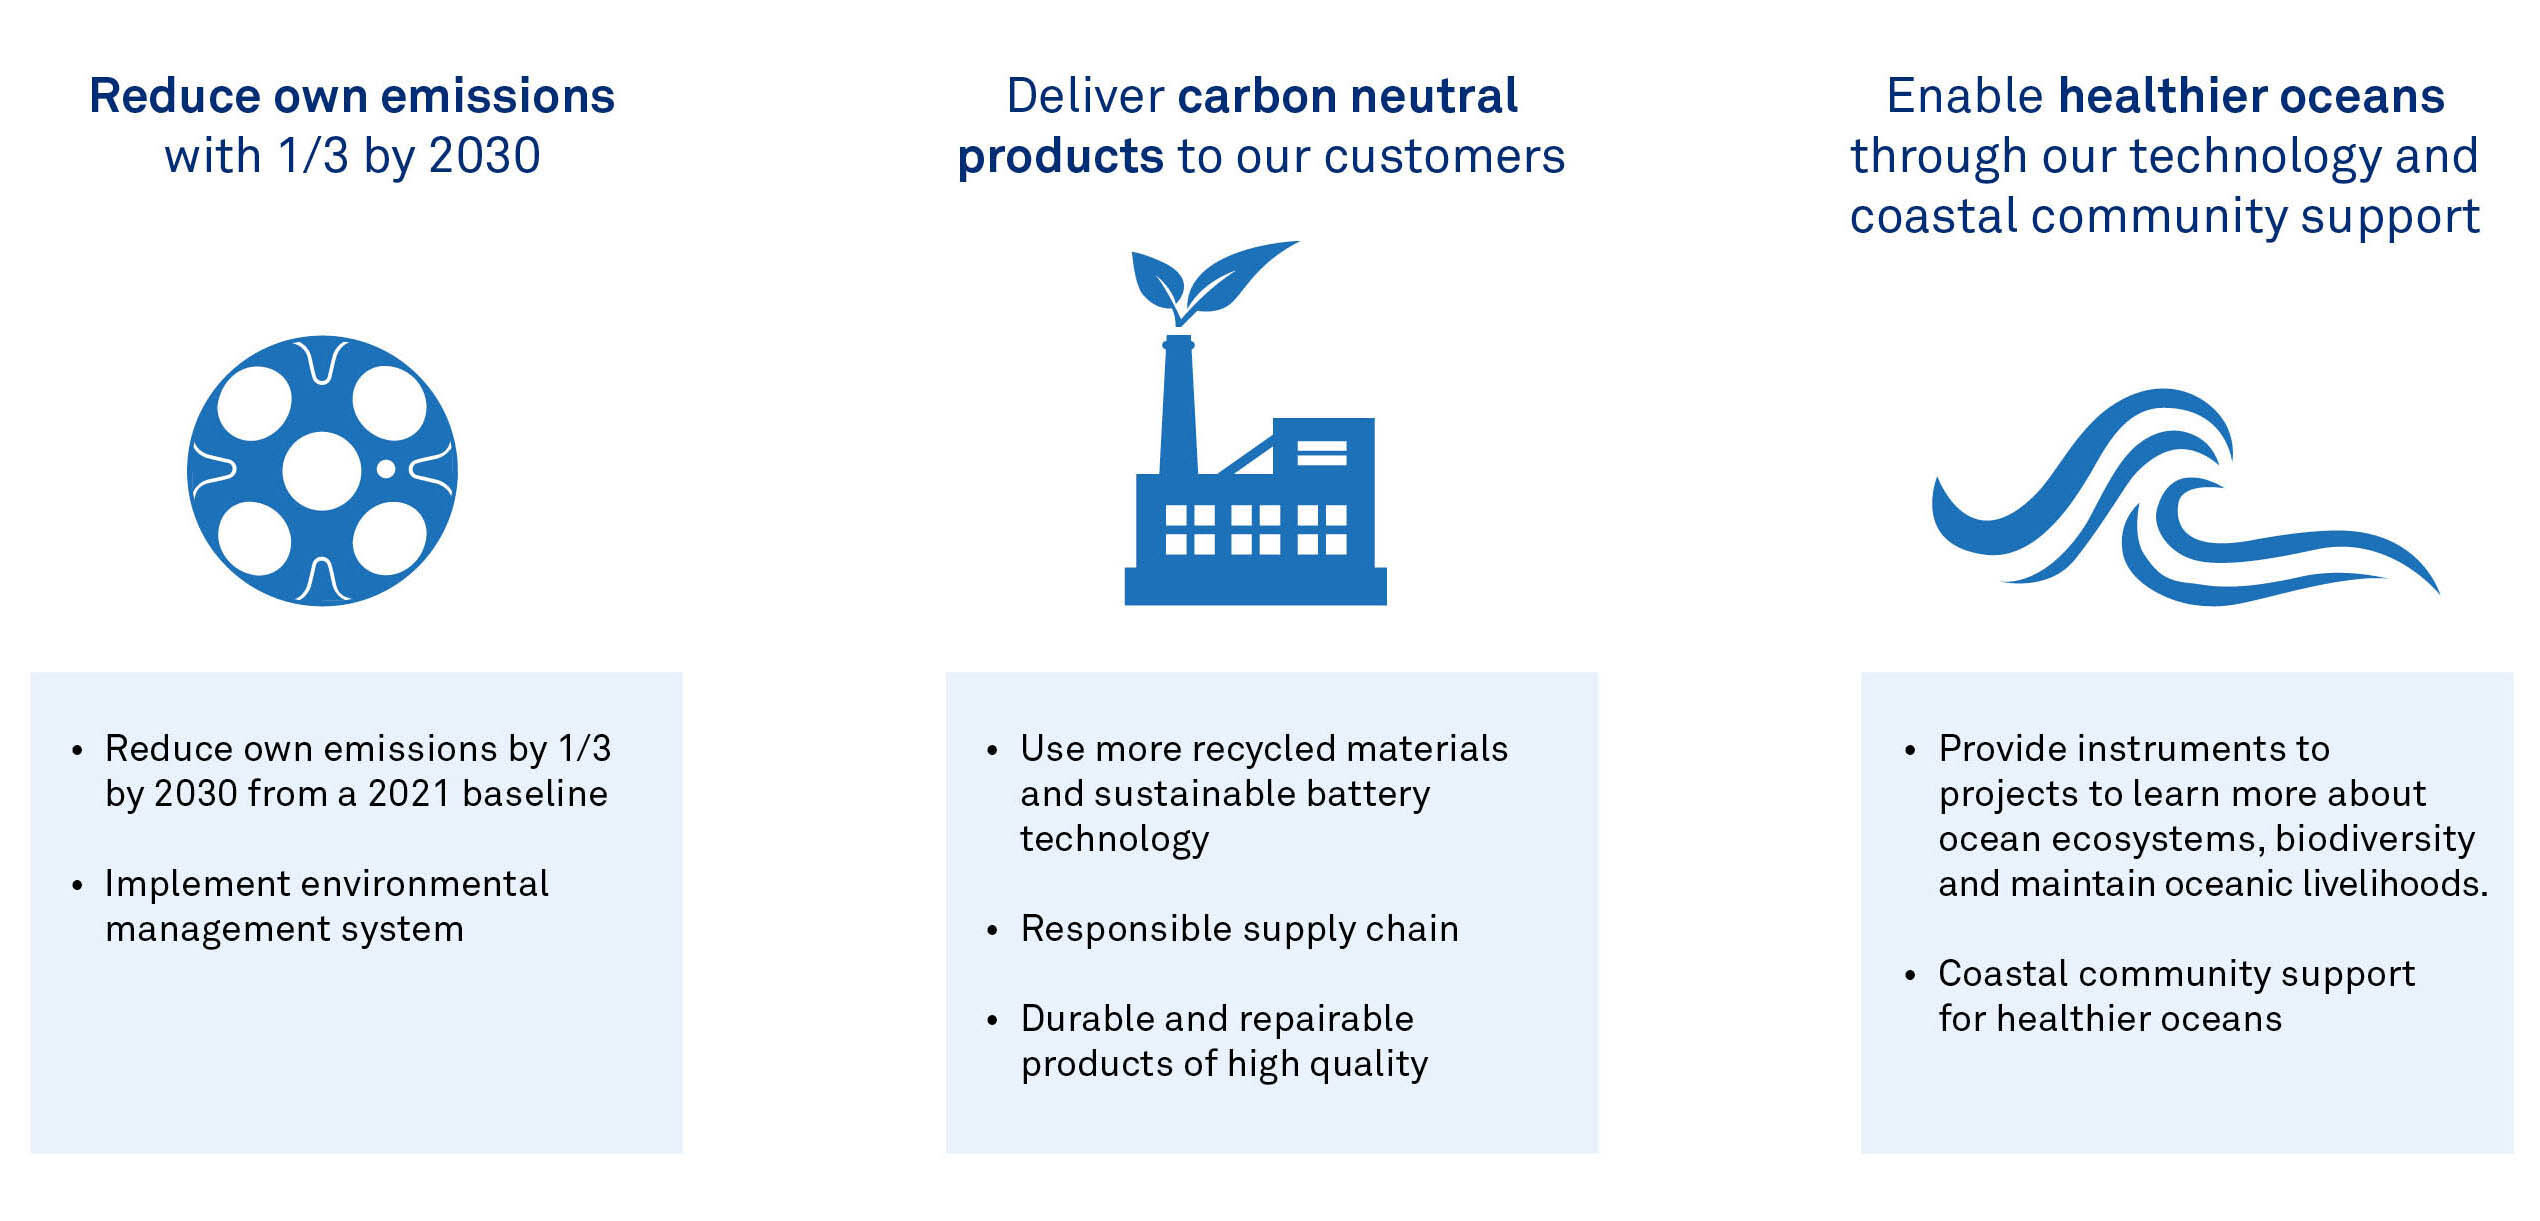 Nortek’s climate and sustainability ambition